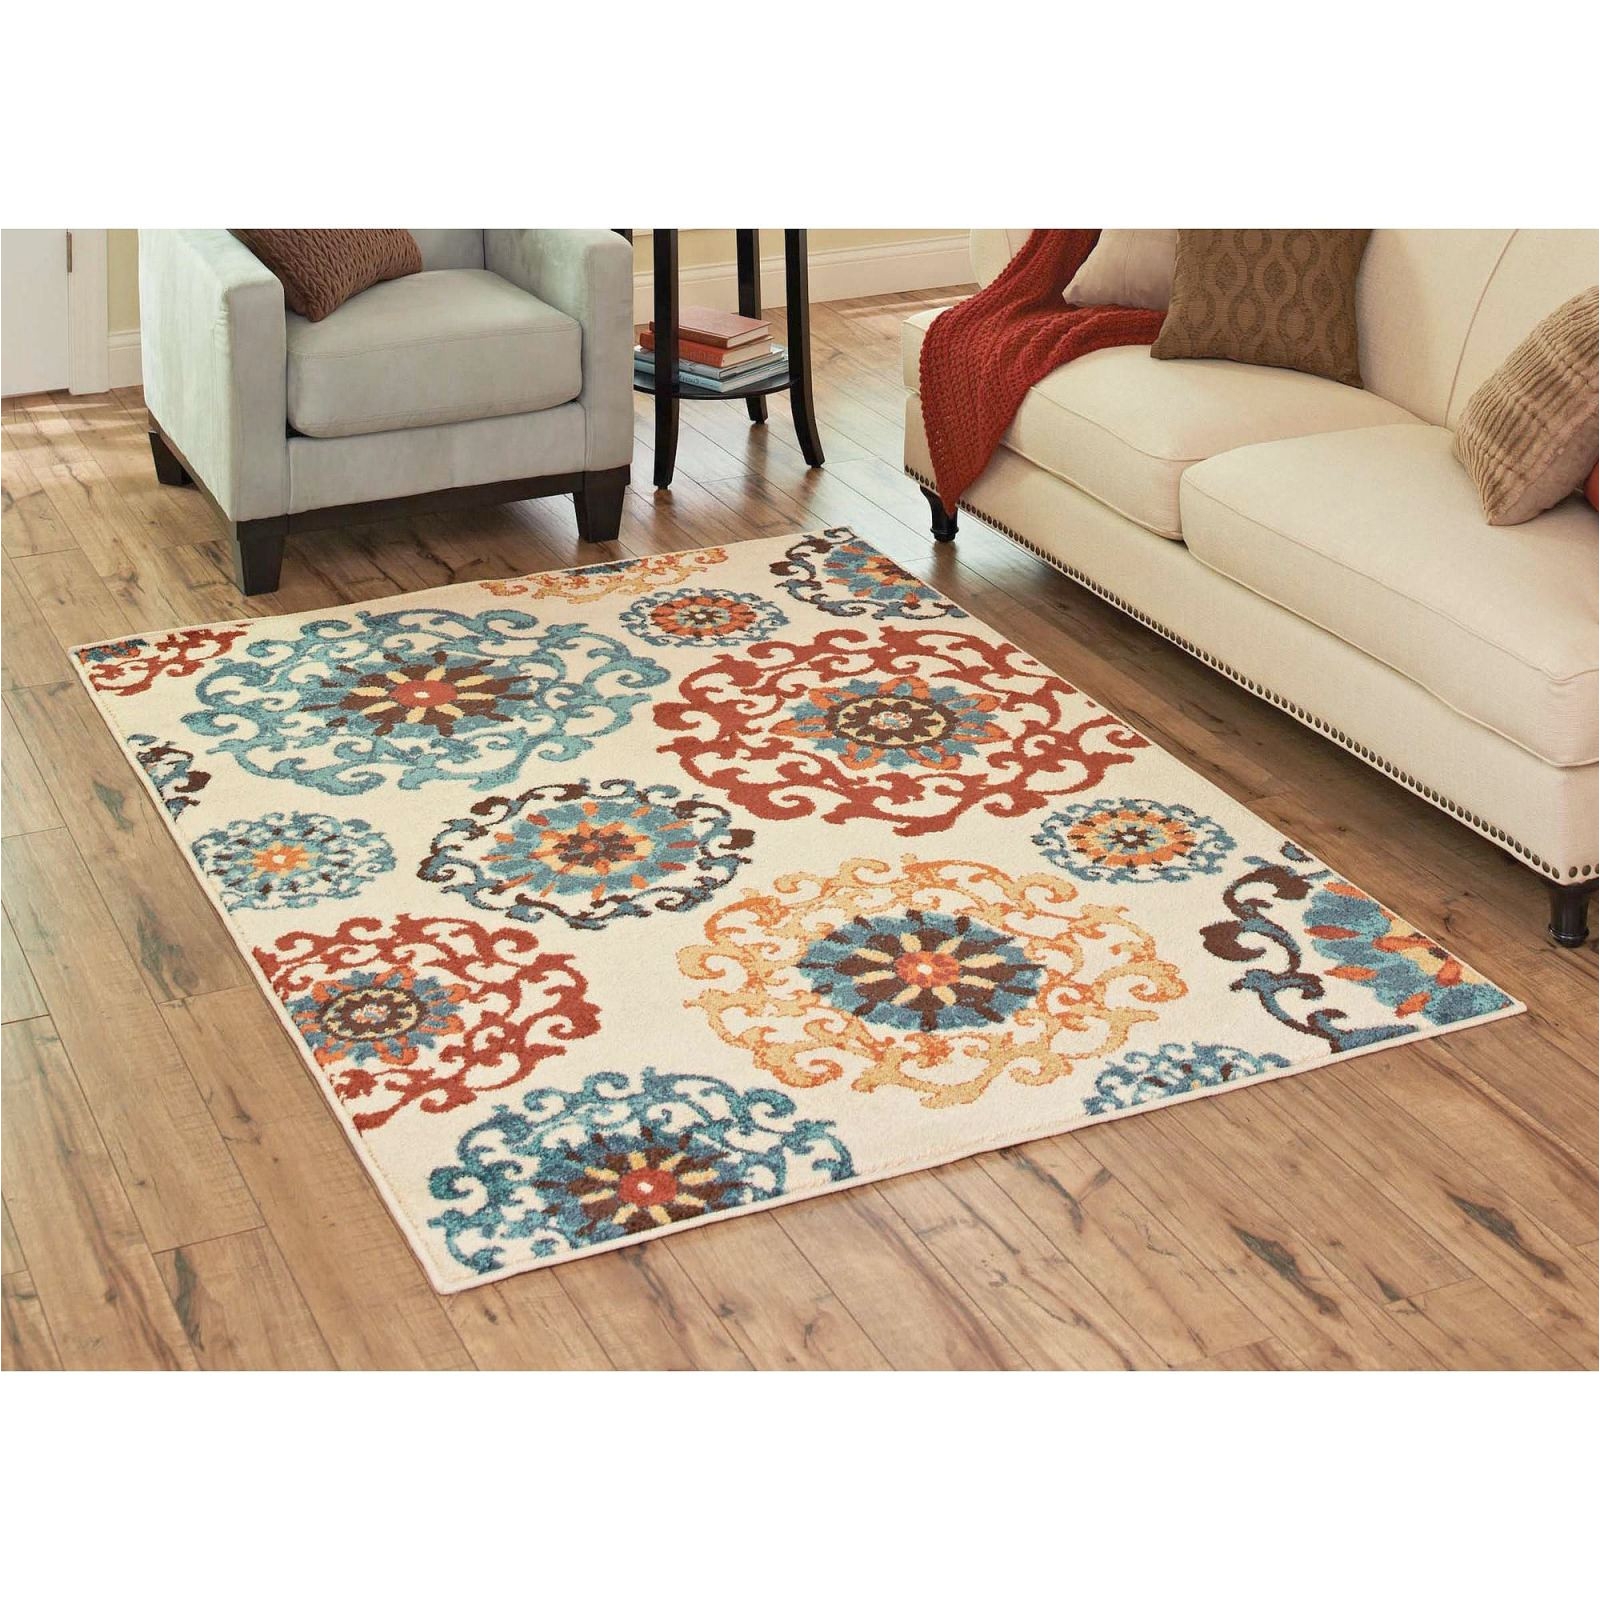 full size living room 8x10 area rugs lowes clearance rugs living